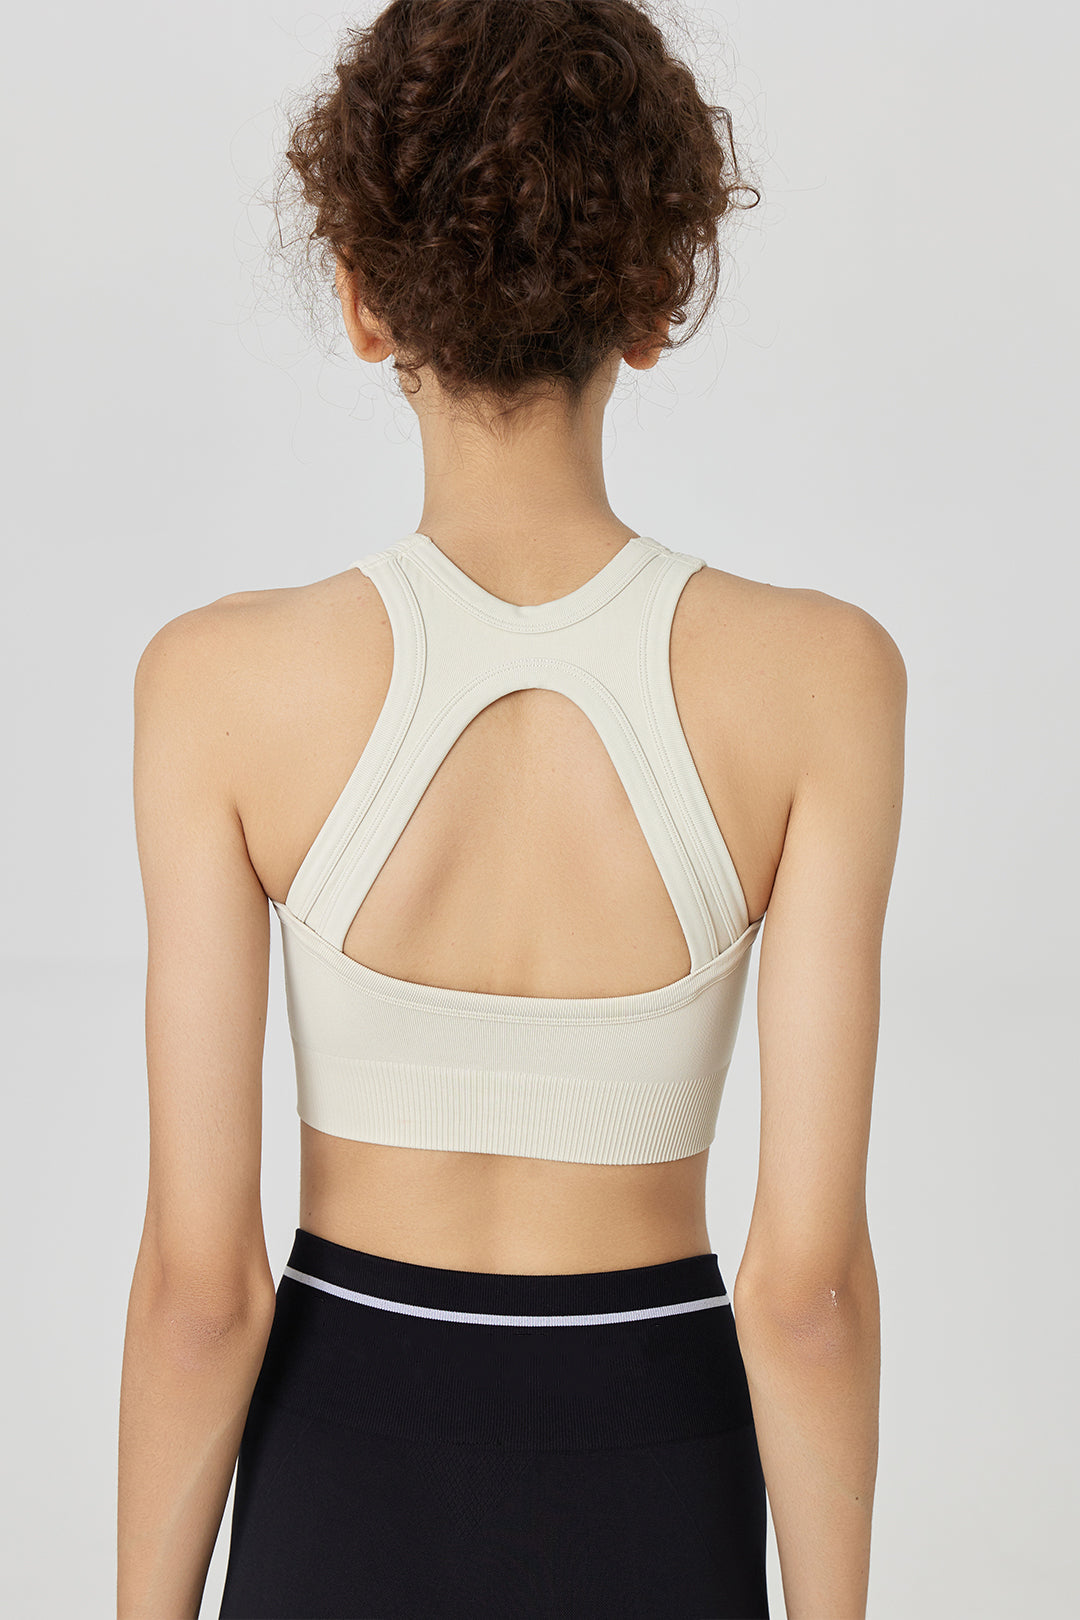 Made from jacquard stretch fabric, this seamless racerback bra feature mesh  detail and a logo-embroidered elastic band to help keep every